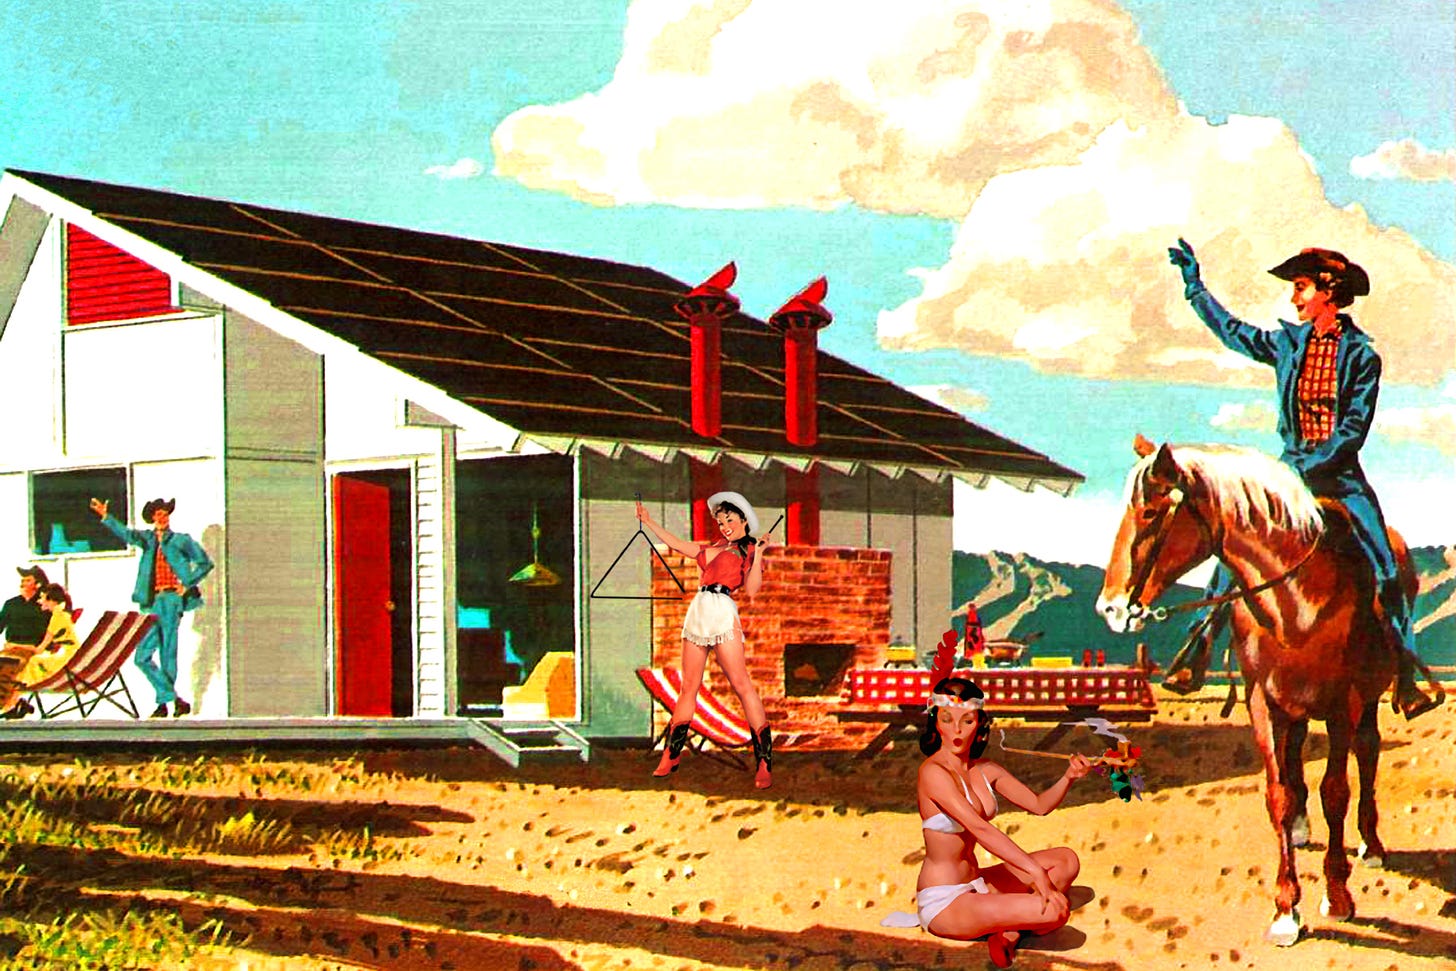 A stylized modernist painting with a sense of irony depiction mostly white people dressed up and acting like cowboys and indians